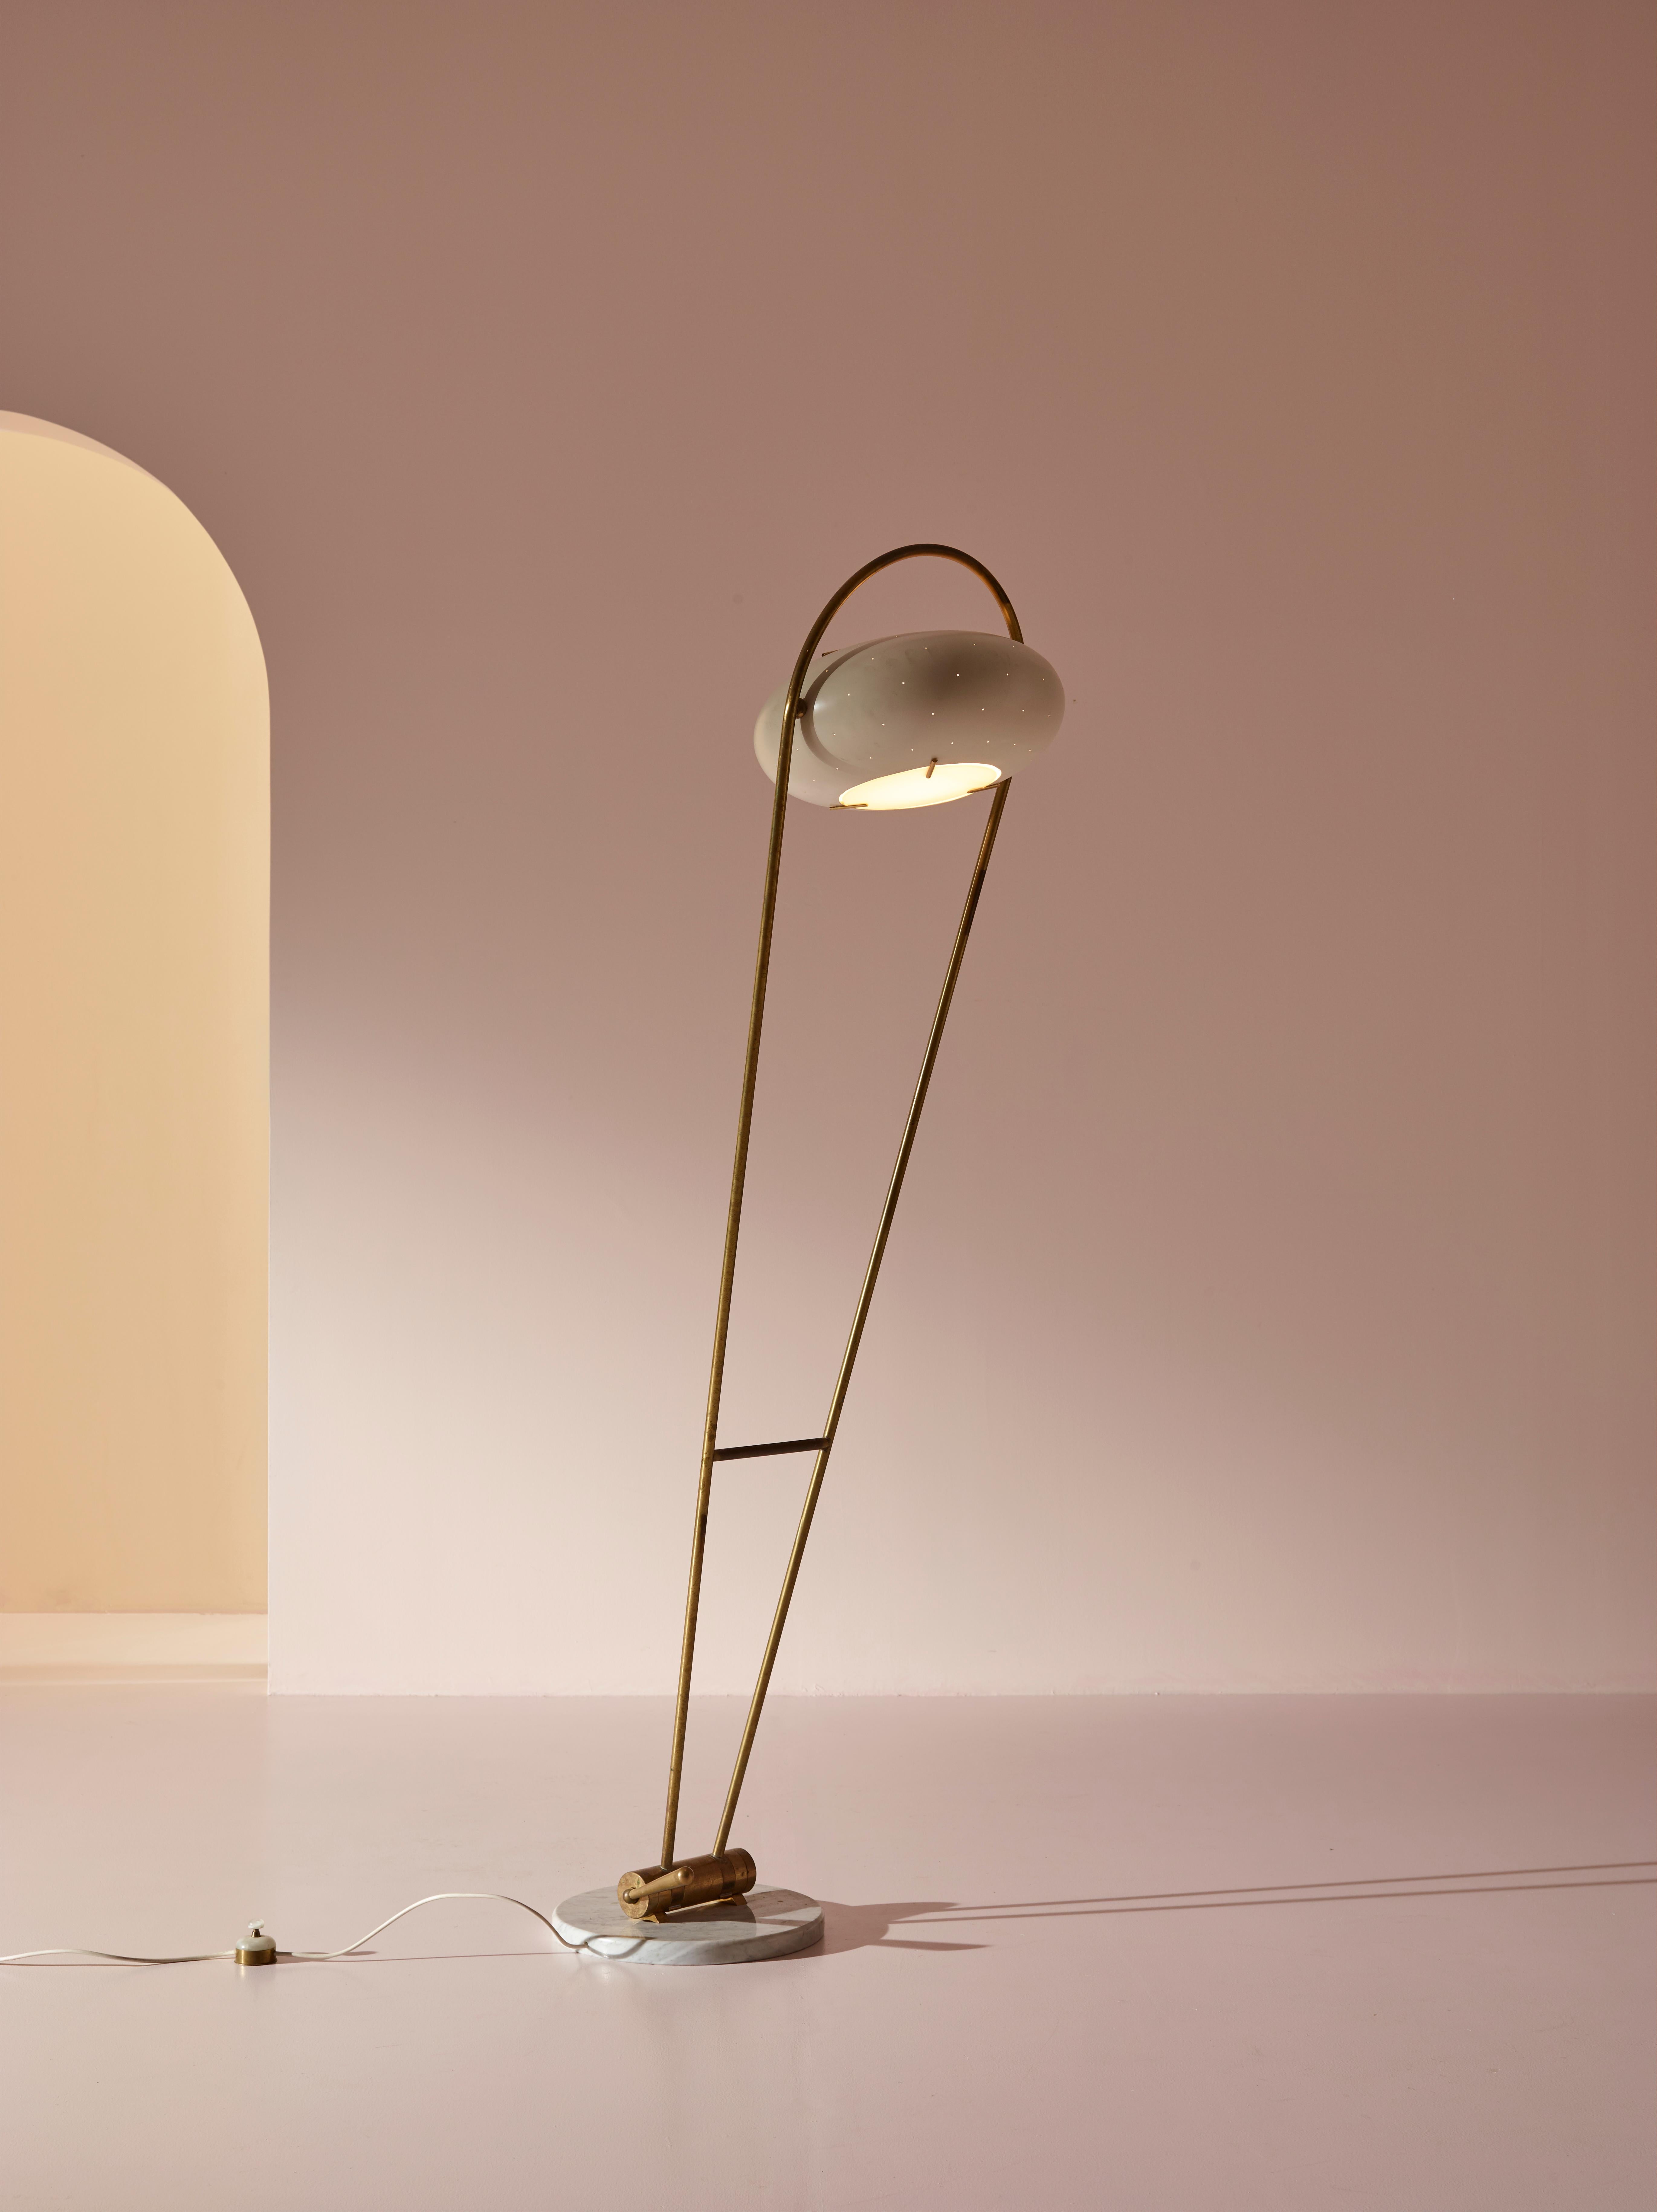 This charming floor lamp is a very rare lighting fixture that was manufactured by Stilux in Italy during the 1950s. Composed of high-quality materials, this lamp combines functionality with design, making it a sought-after piece for both collectors